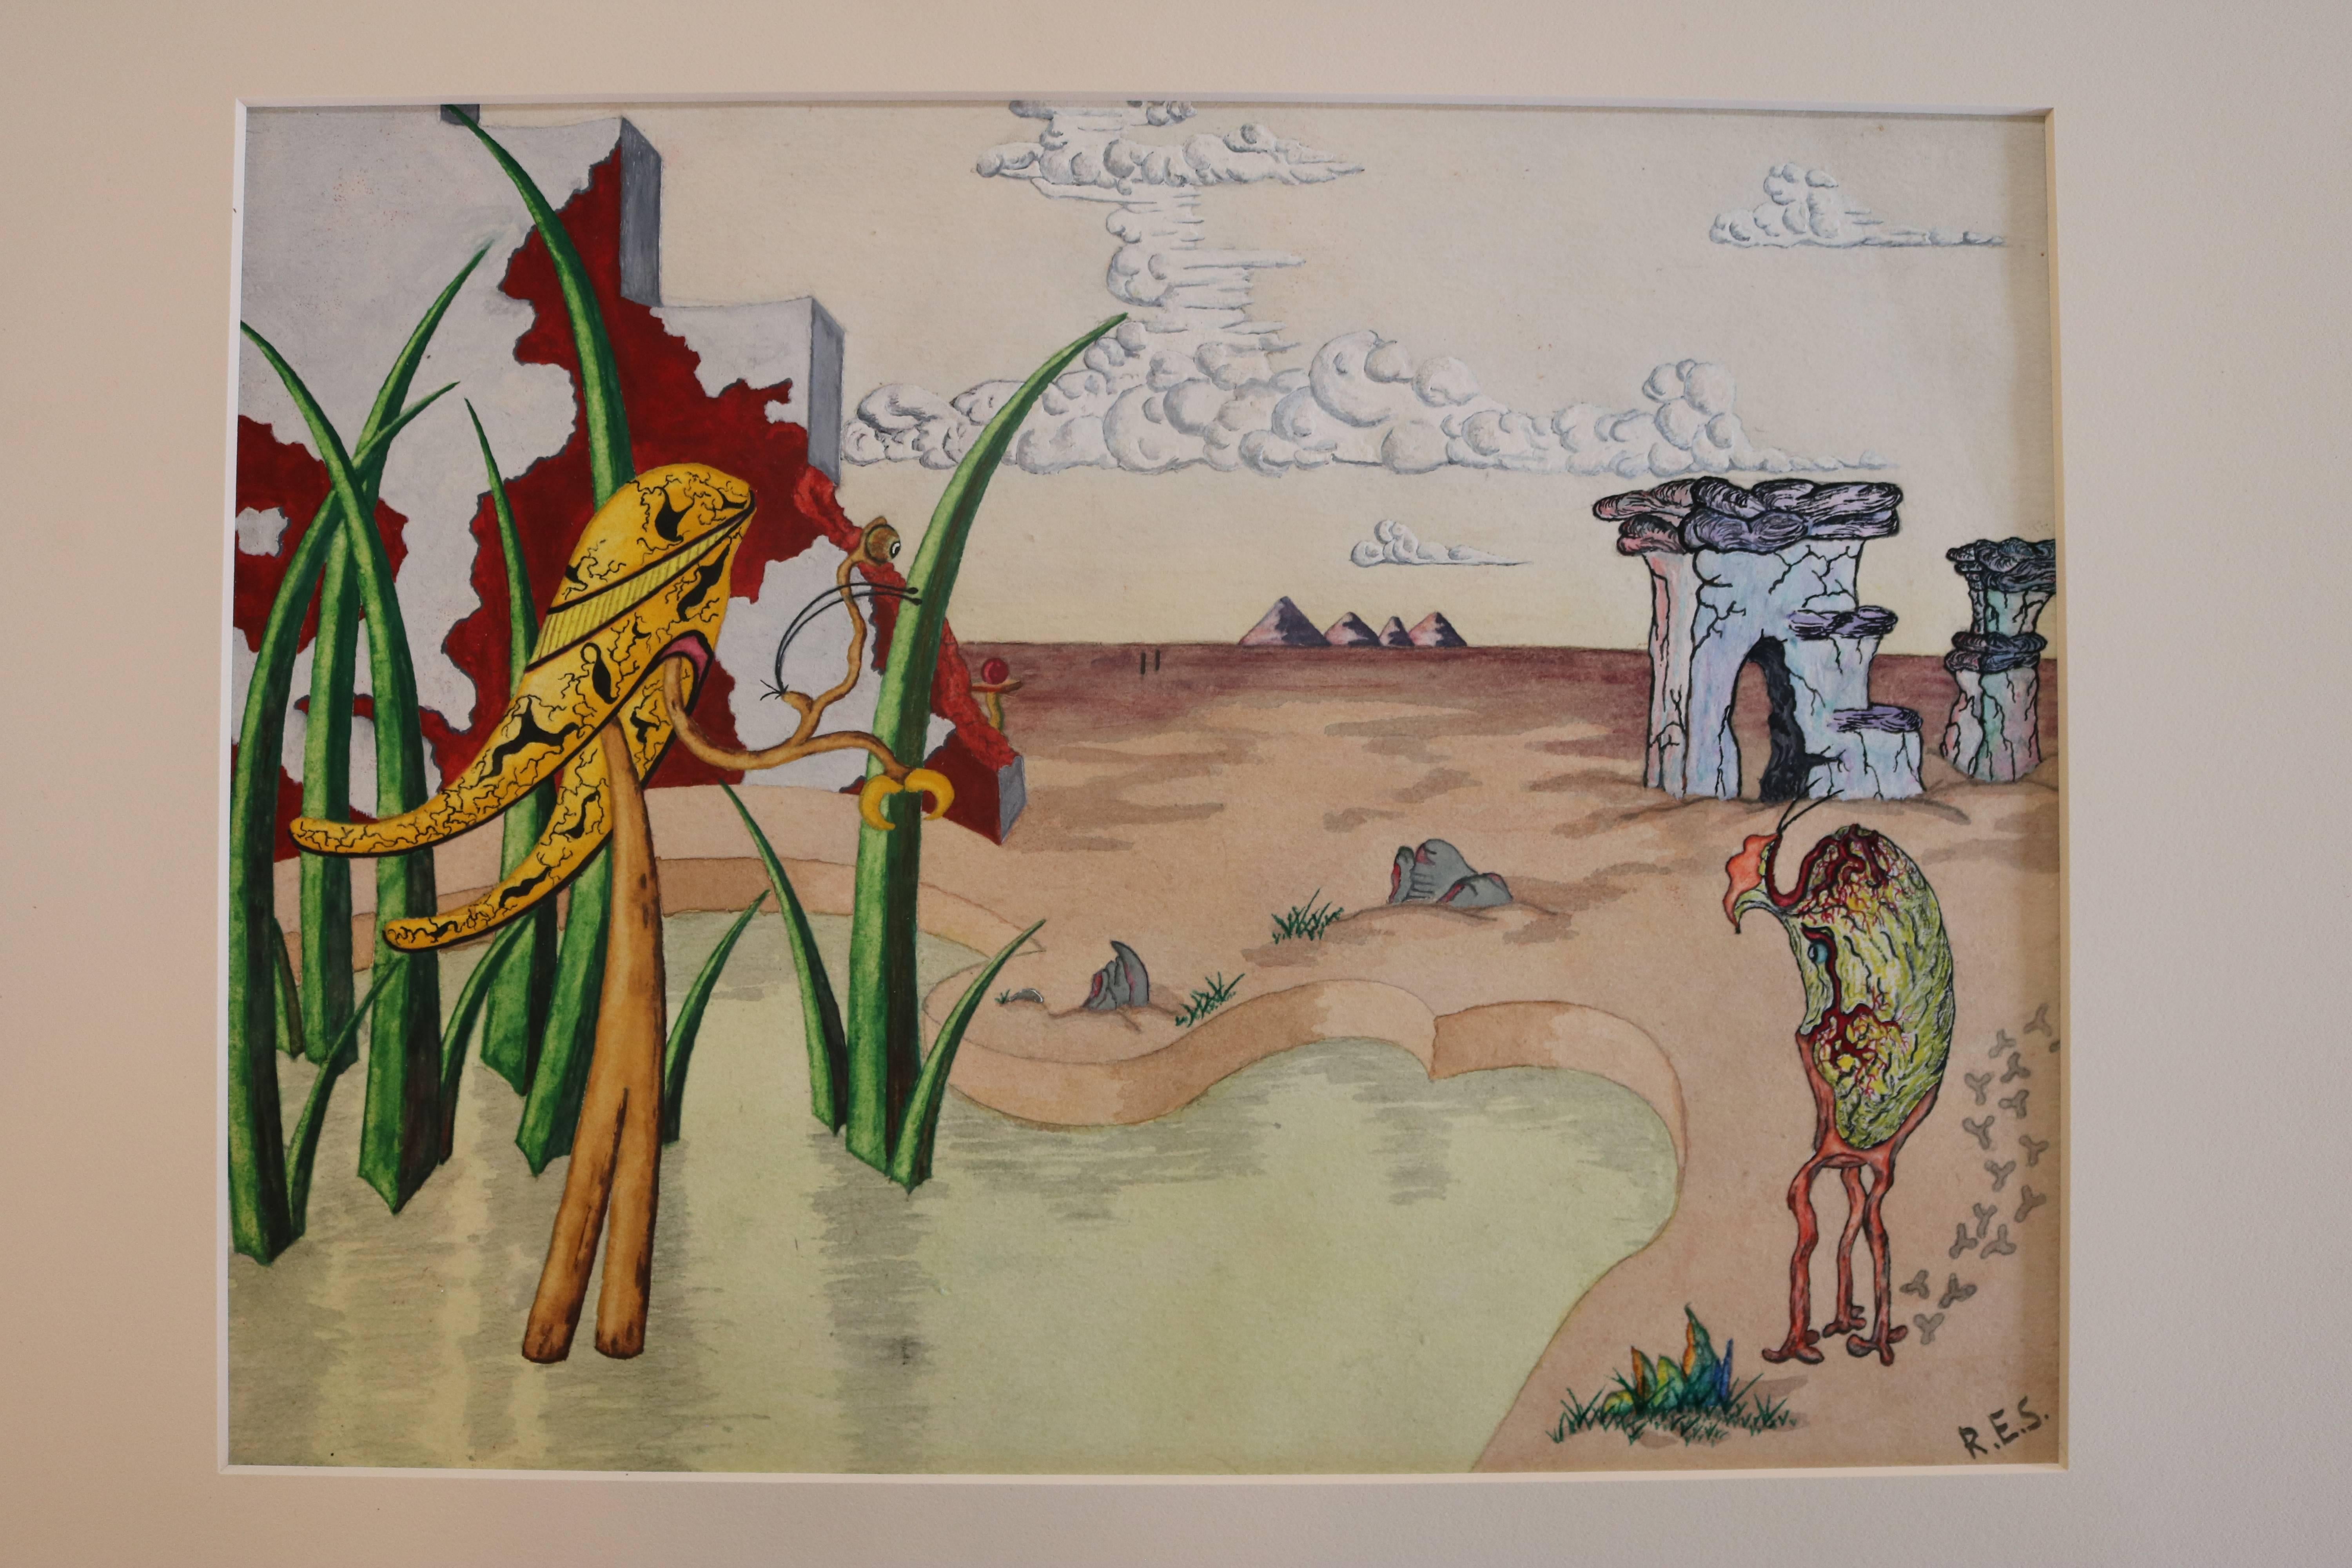 Mid-Century Modern Surrealist Landscape Watercolor Signed R. E. Schwelke and Dated 1947 For Sale